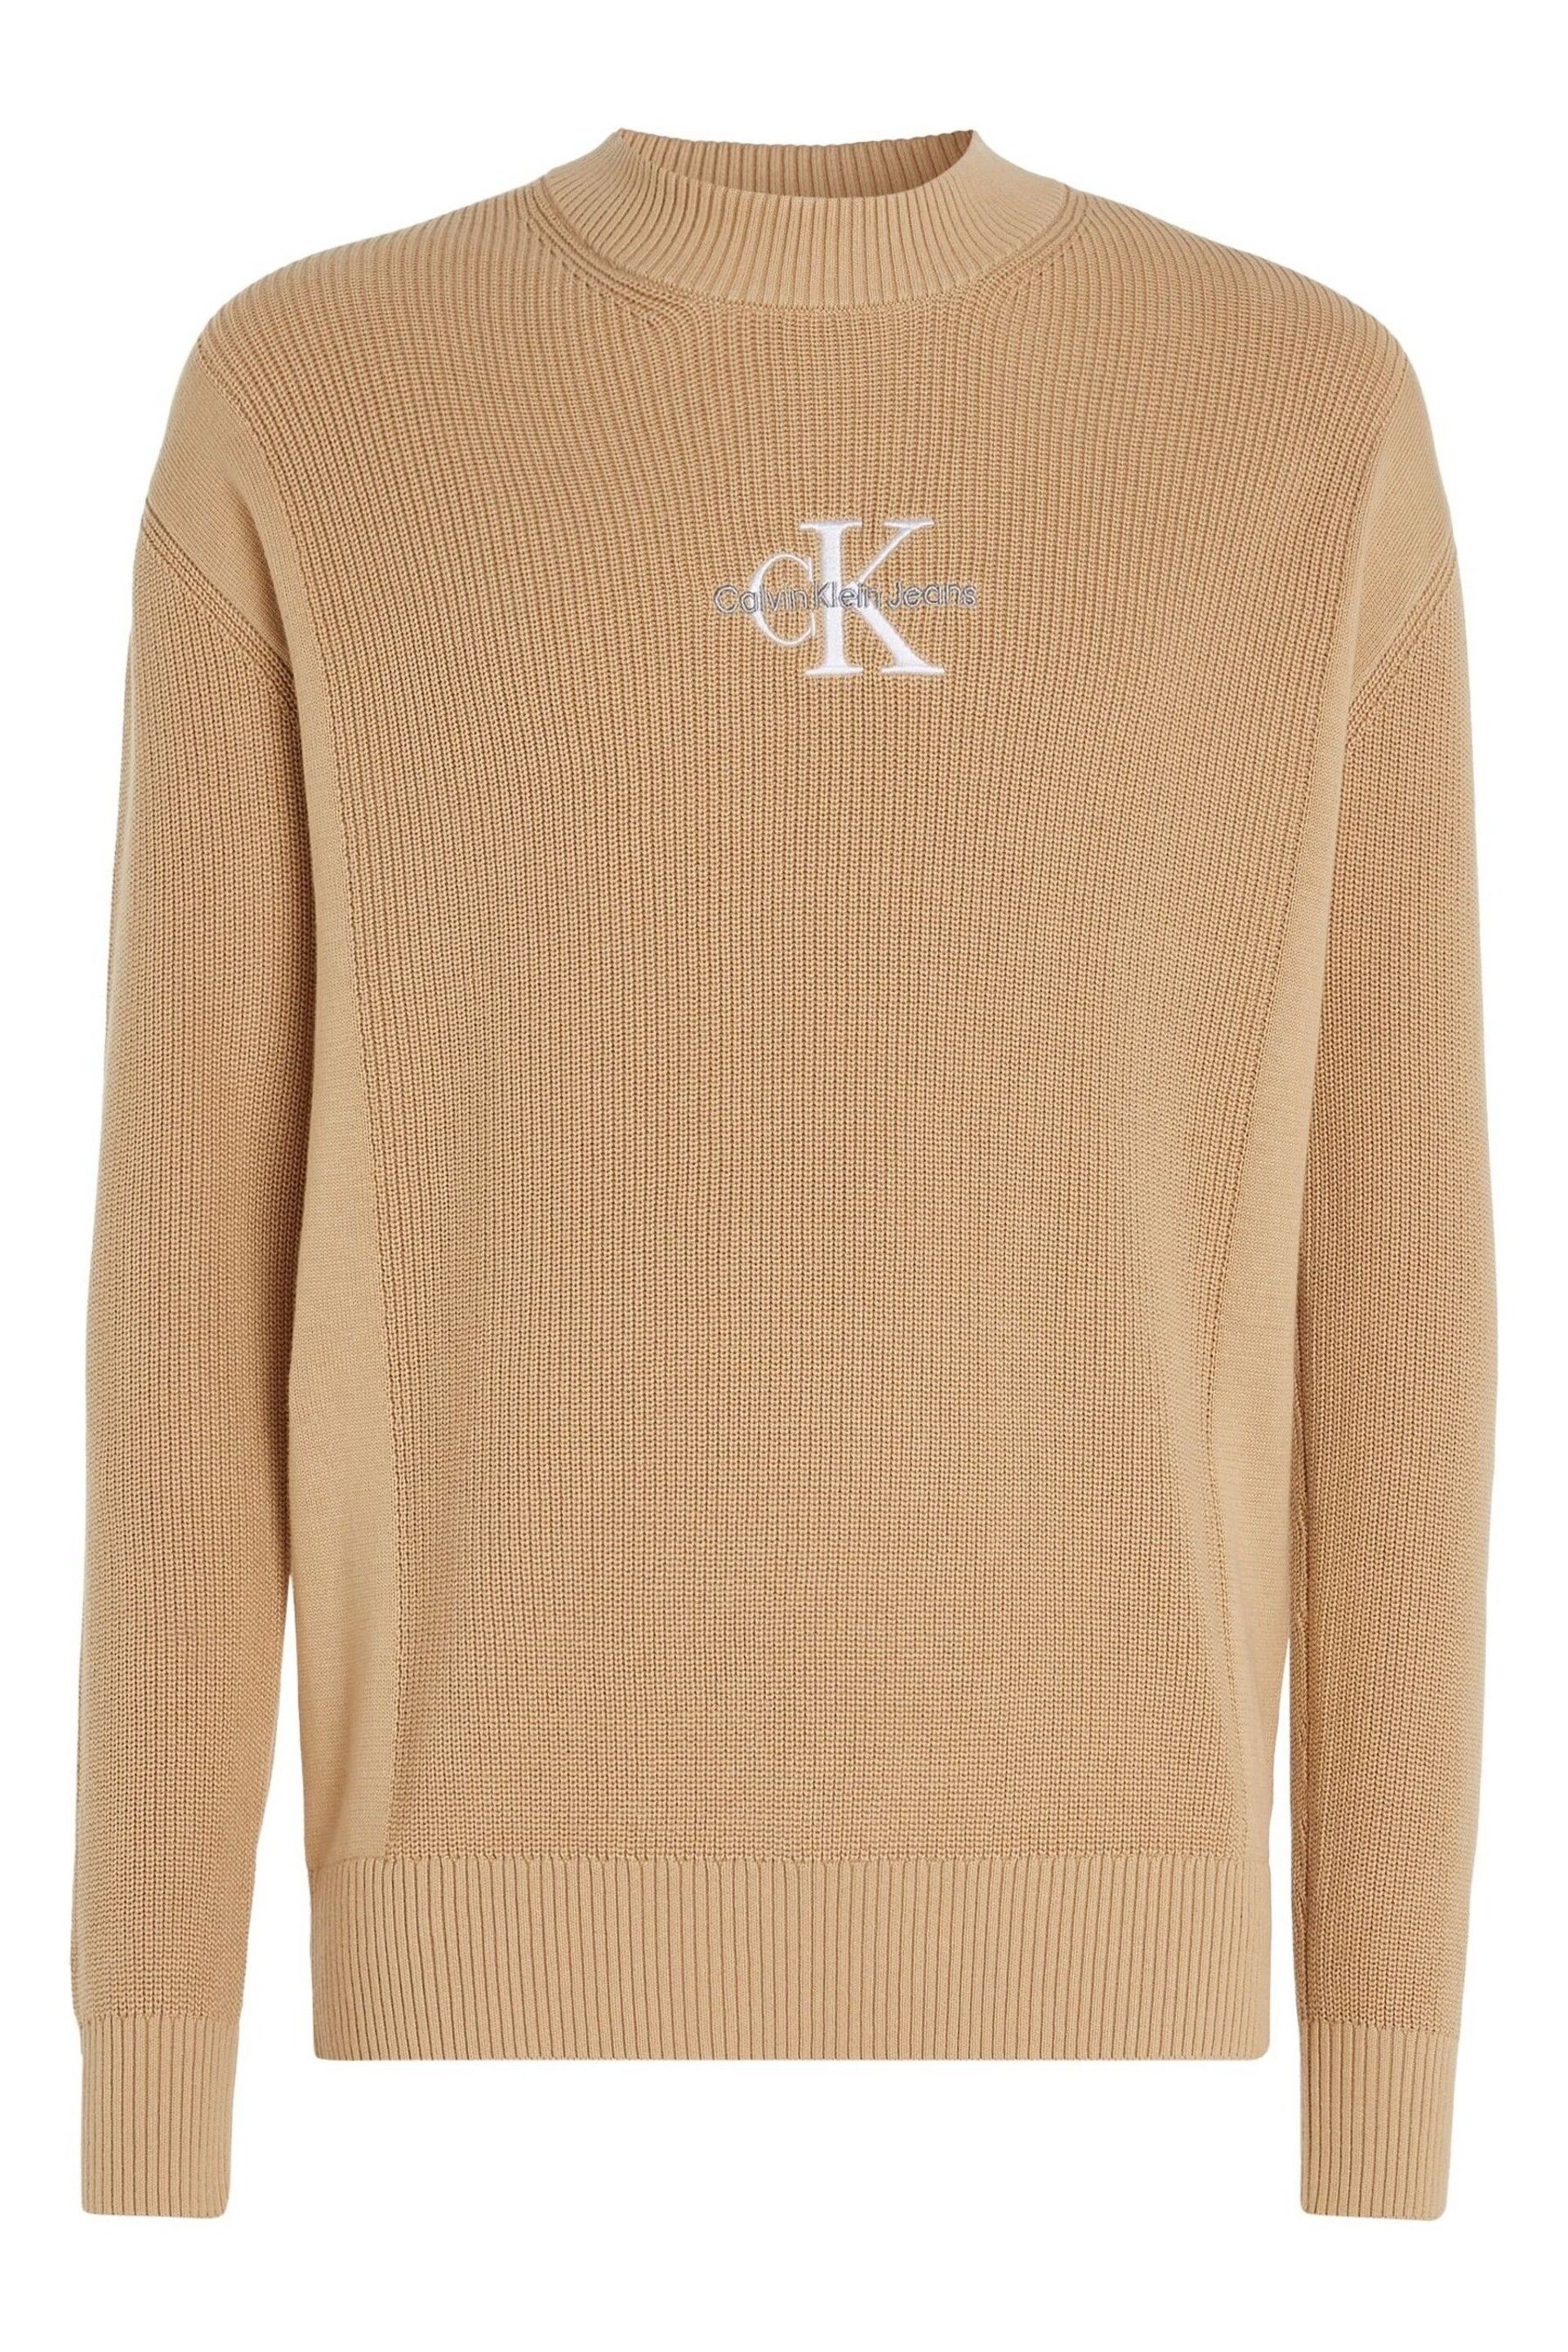 Calvin Klein Jeans Monologo Natural Sweater - Image 4 of 6